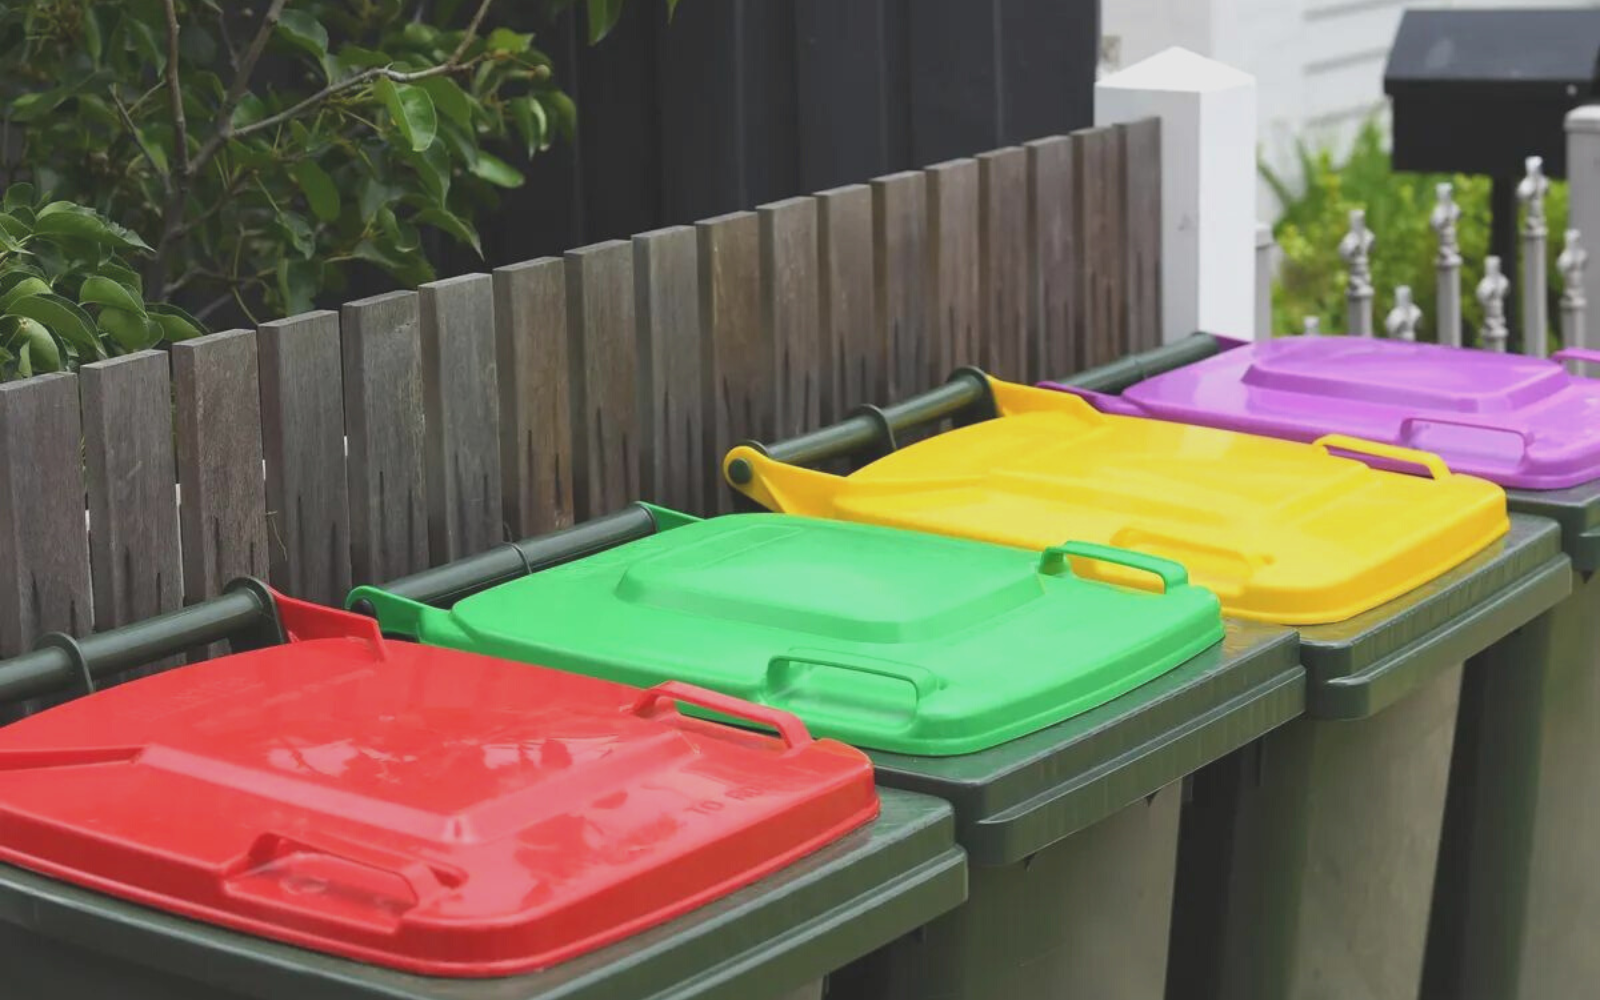 Victoria's Plan For Kerbside Soft-Plastic Recycling! - Go For Zero